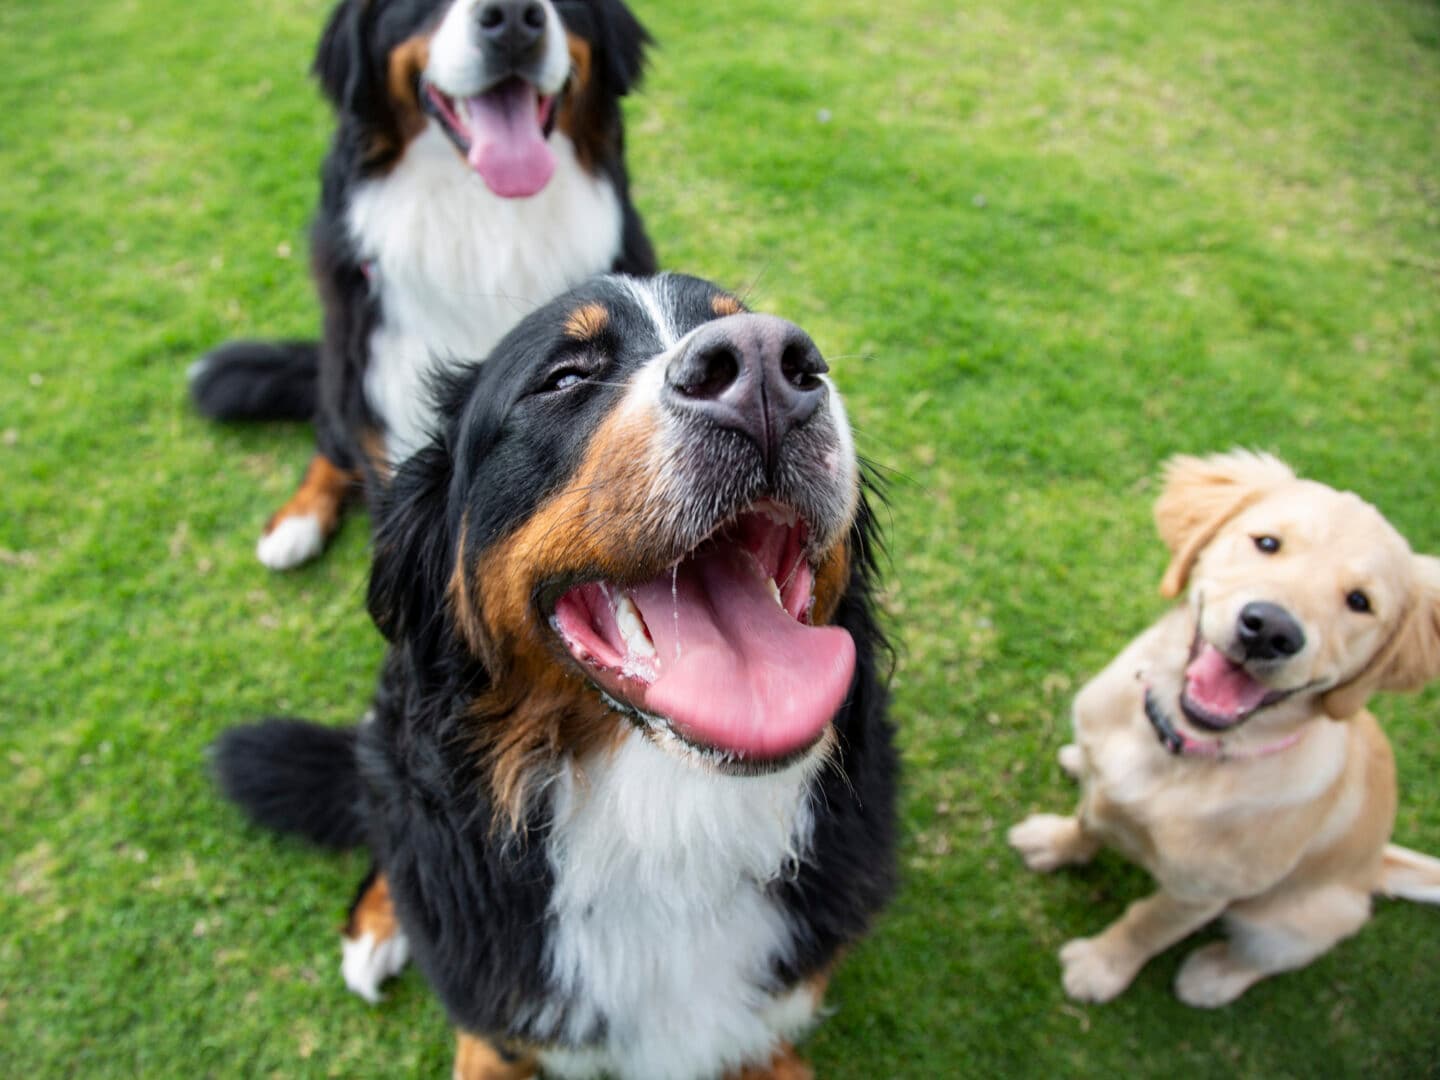 Dog walker vs. dog day care: Which one is best for your dog?